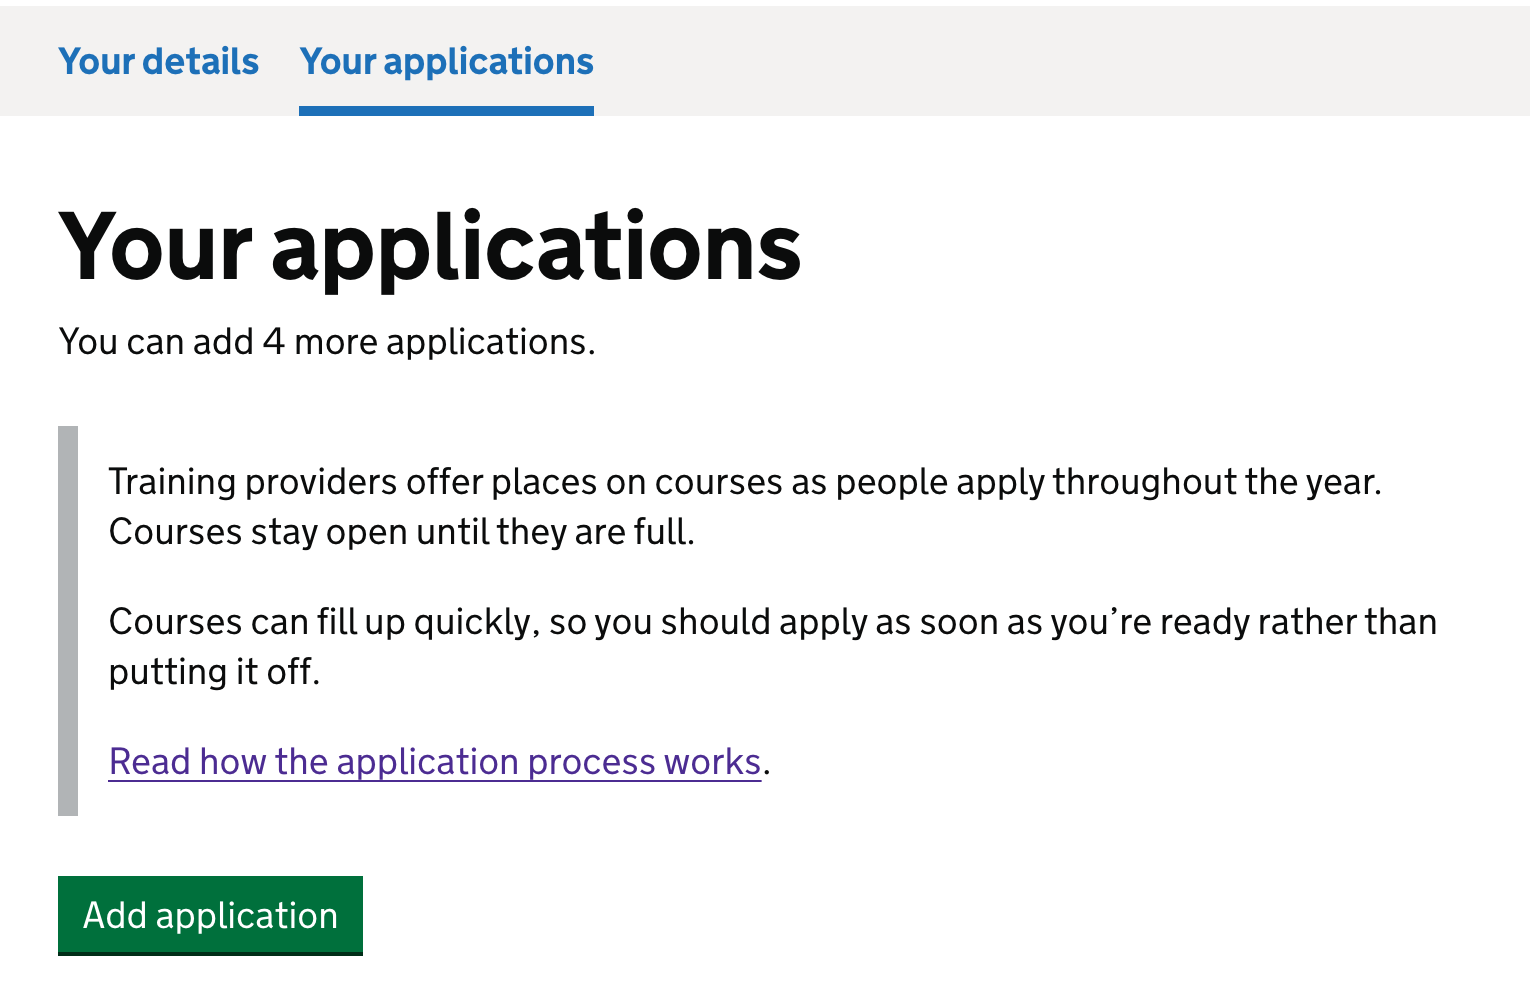 Screenshot of the 'Your applications' tab showing candidates they can add an application by selecting a green button.